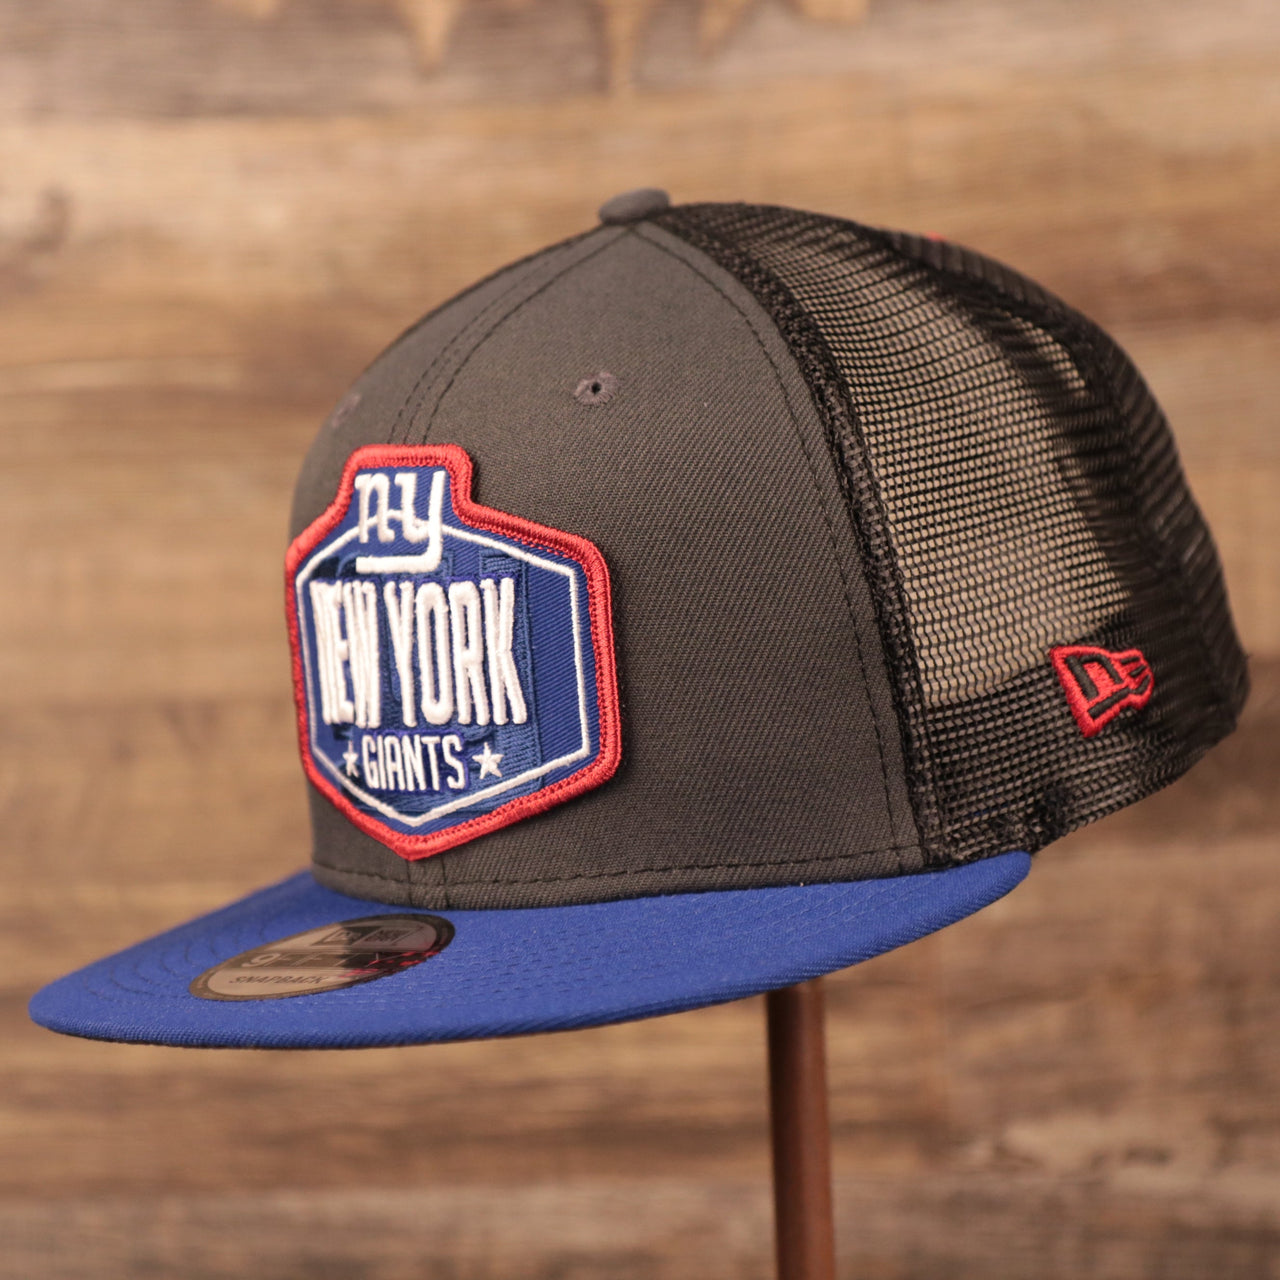 The NY Giants meshback 9fifty caps for the 2021 NFL Draft.